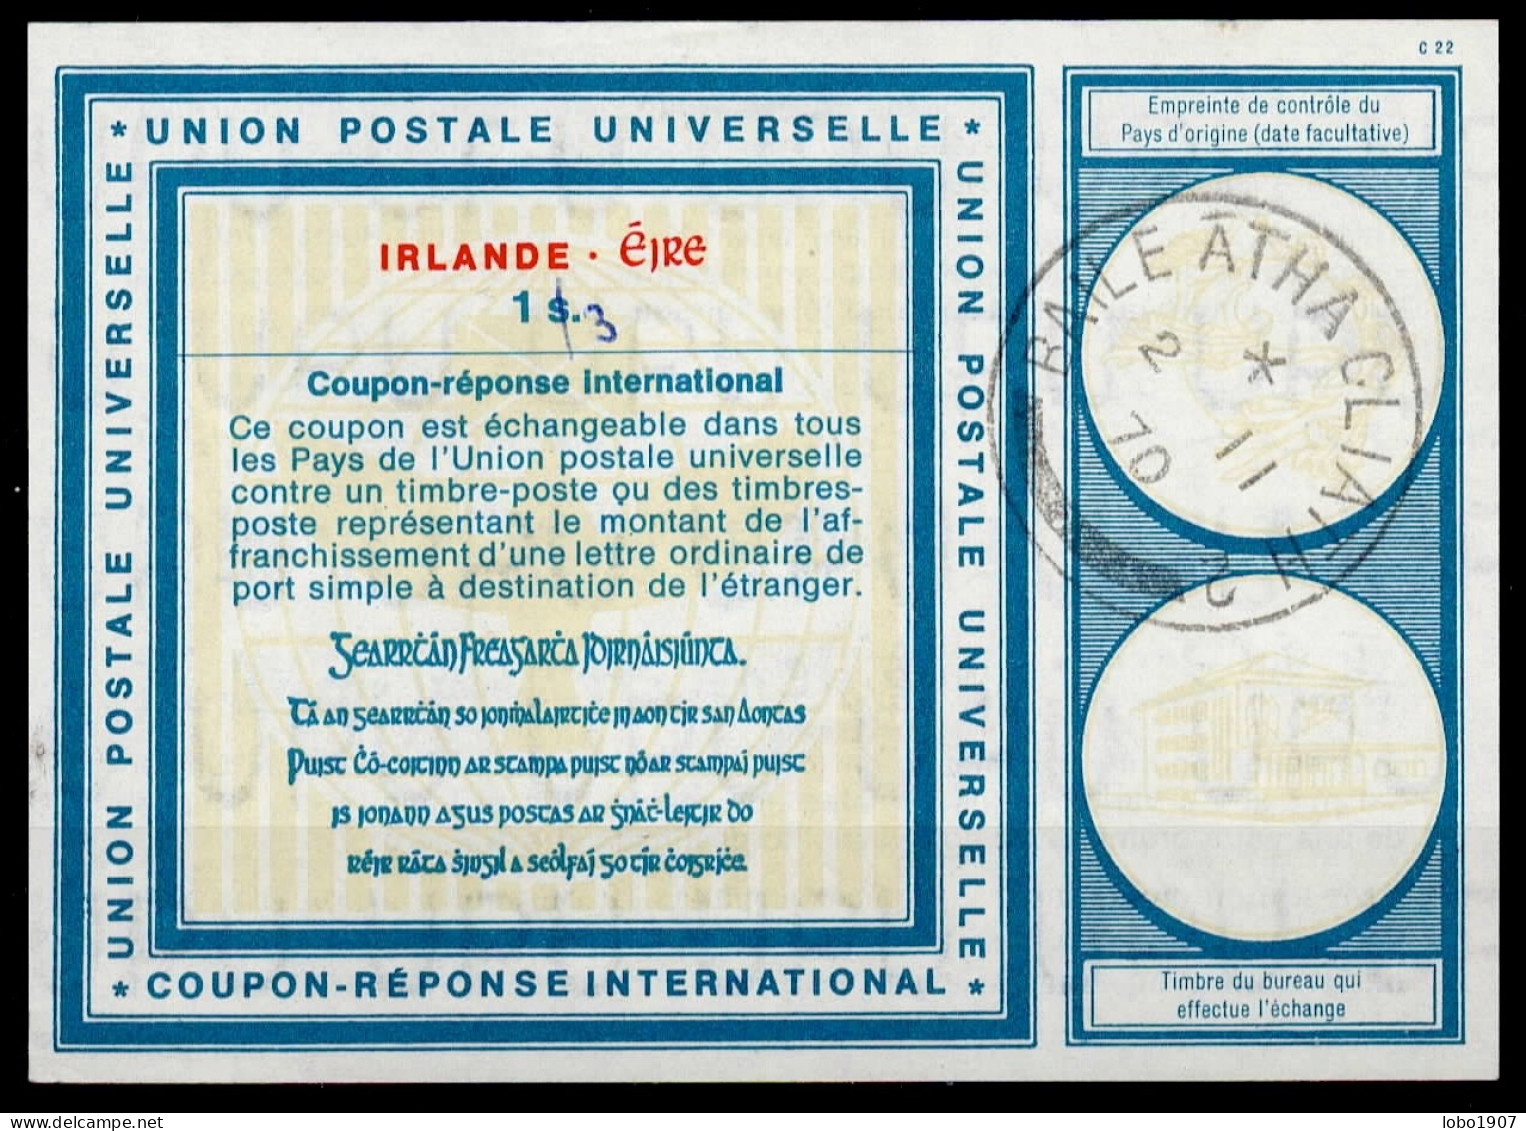 IRLANDE IRELAND ÉIRE  Vi19  (1s.) 3(d.) On 1s. International Reply Coupon Reponse Antwortschein IRC IAS O B.A.C. 02.11.7 - Entiers Postaux